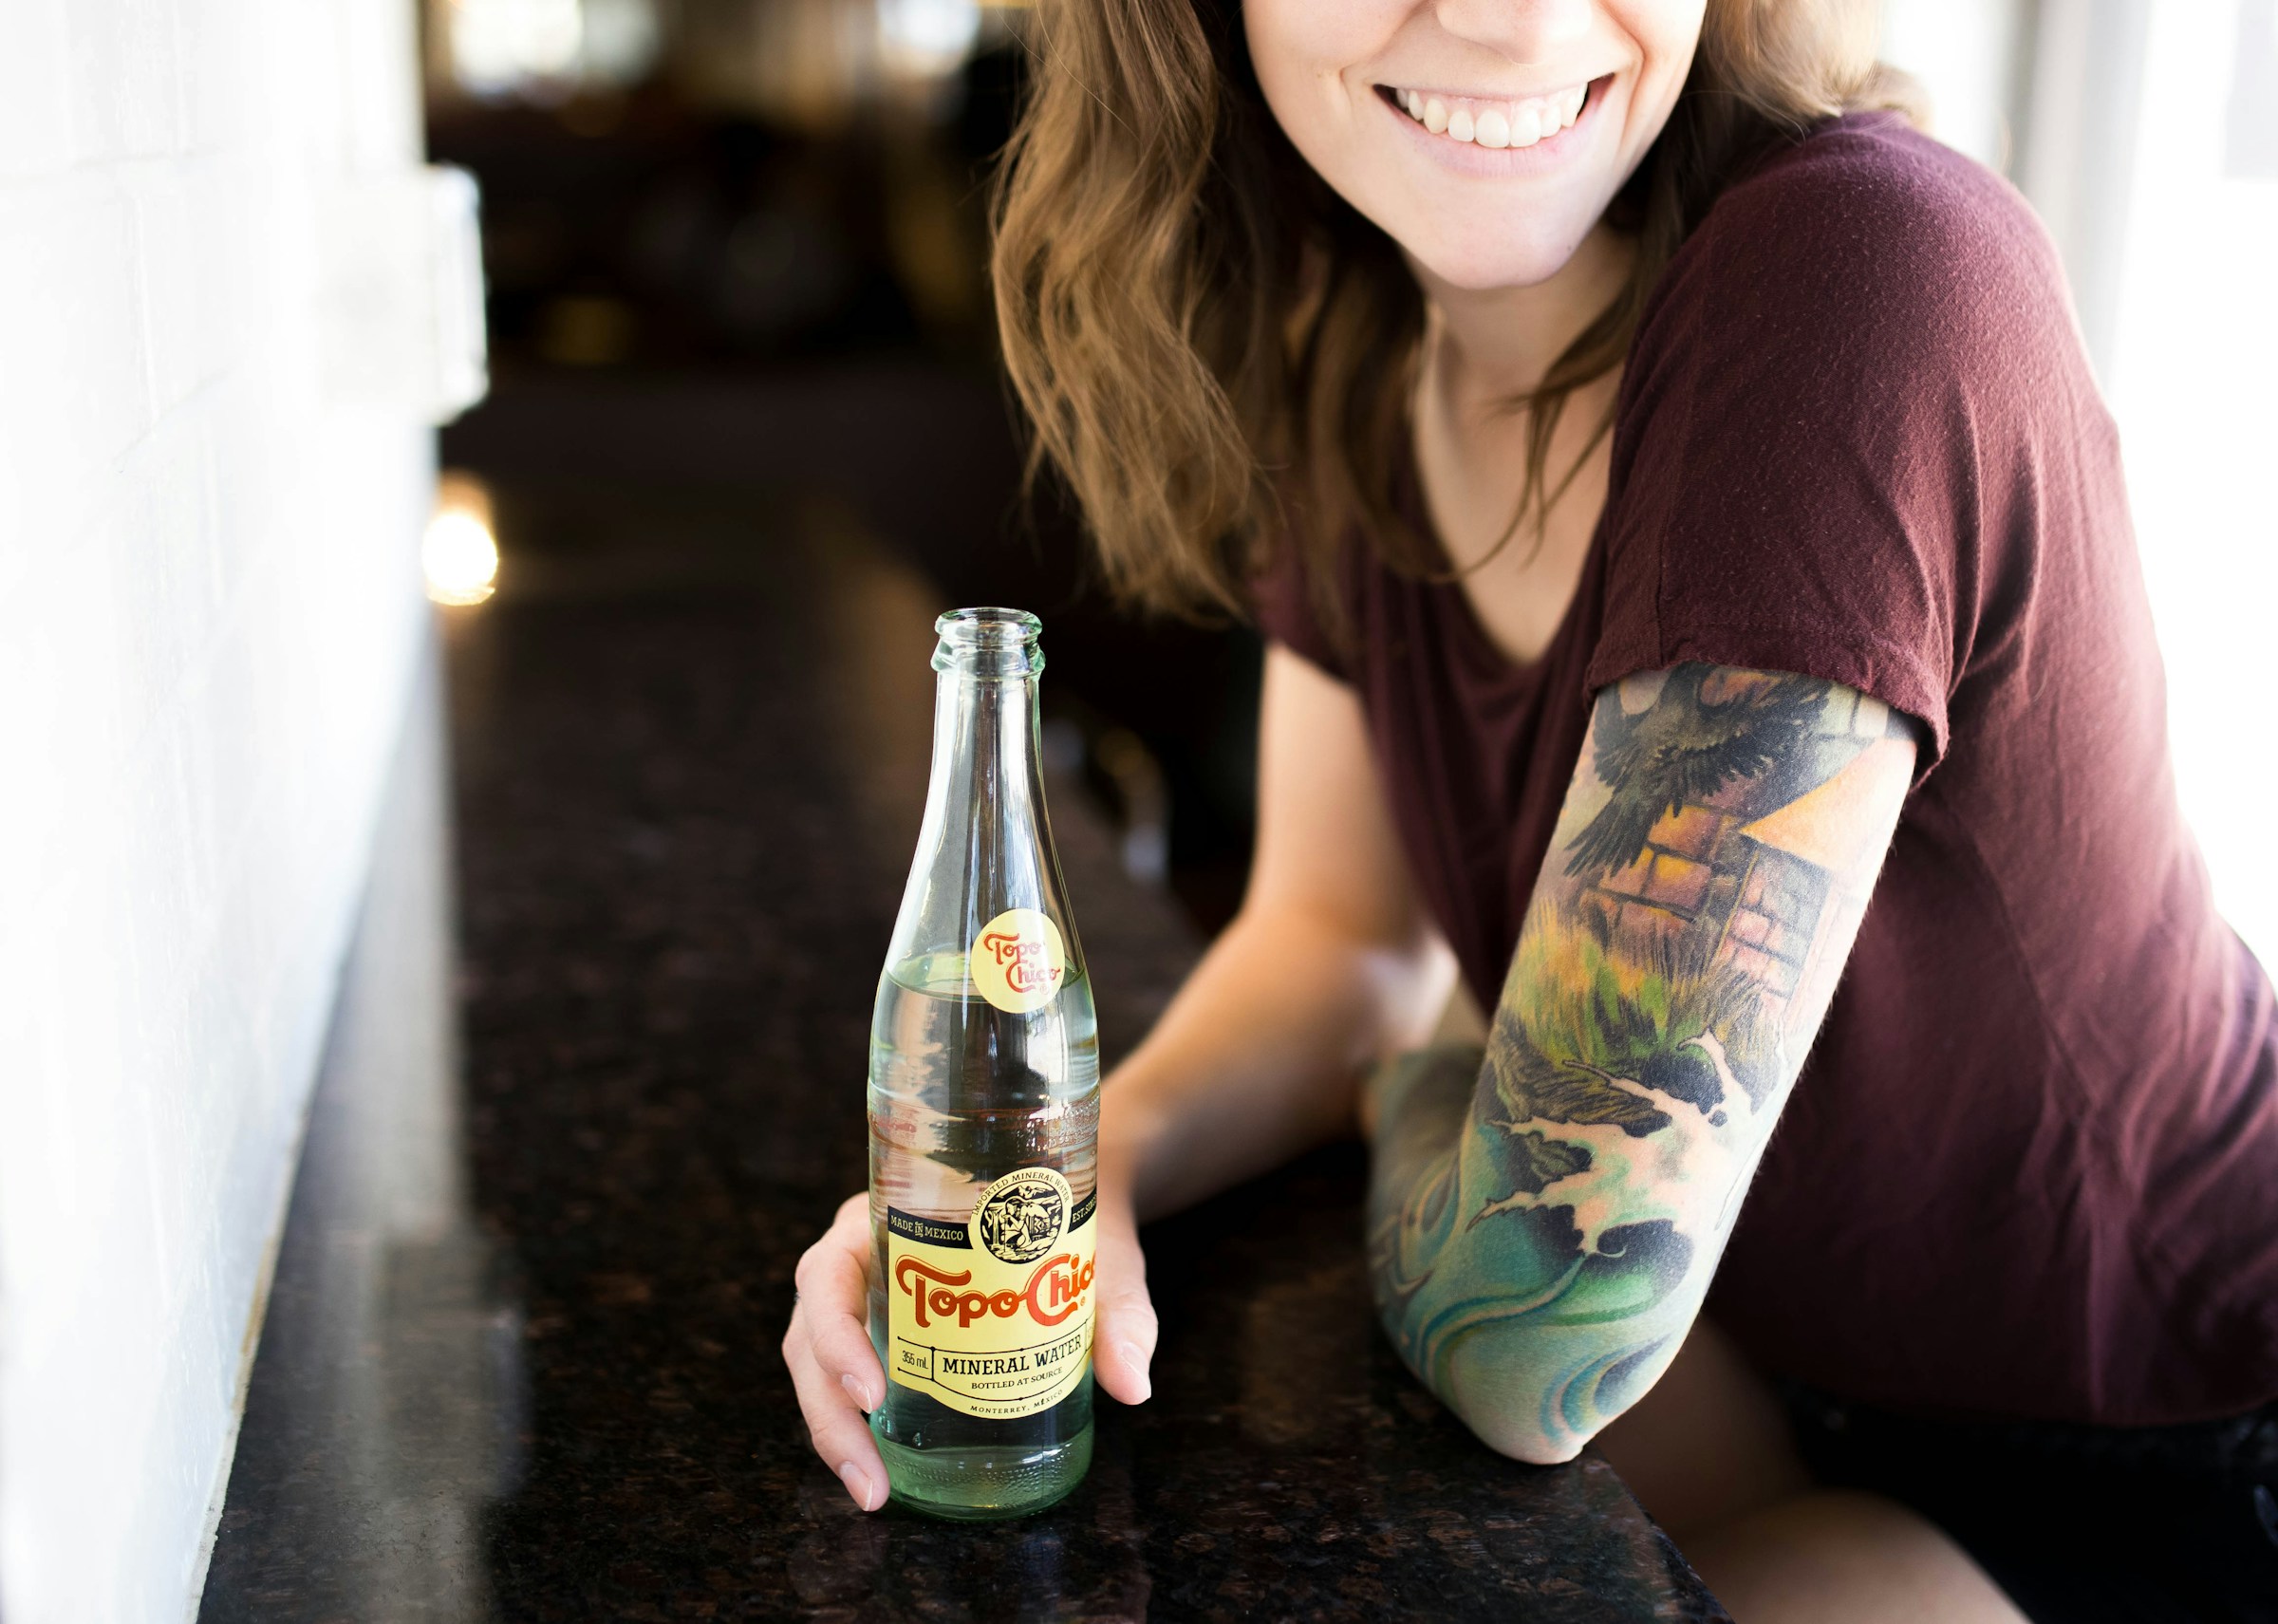 A woman with a tattoo holding a bottle | Source: Unsplash